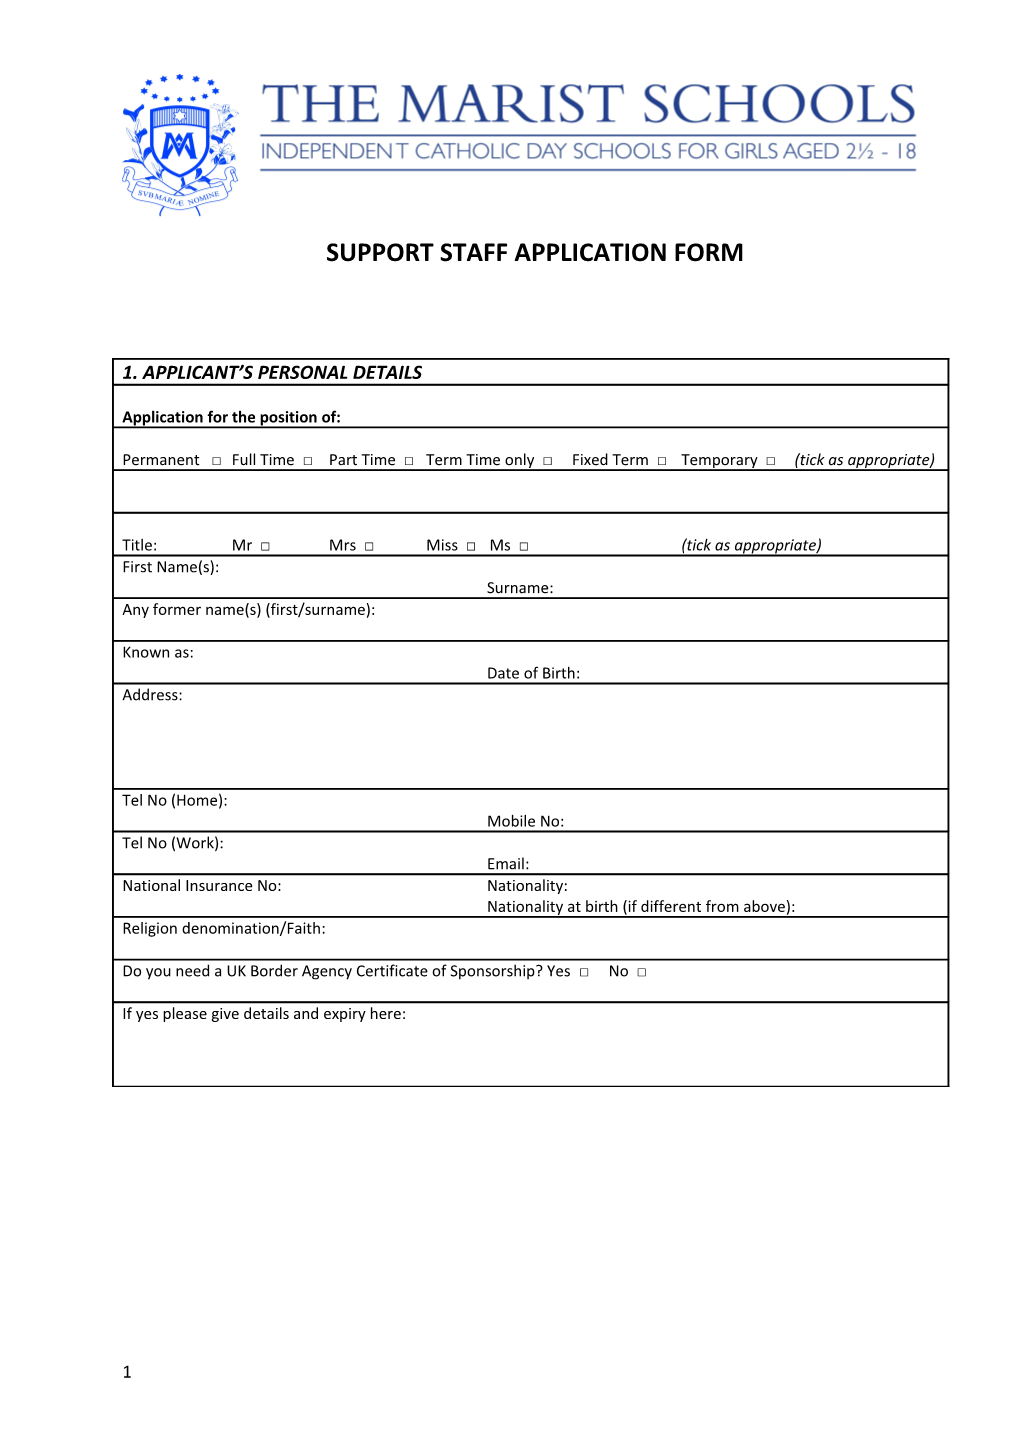 Support Staff Application Form s3